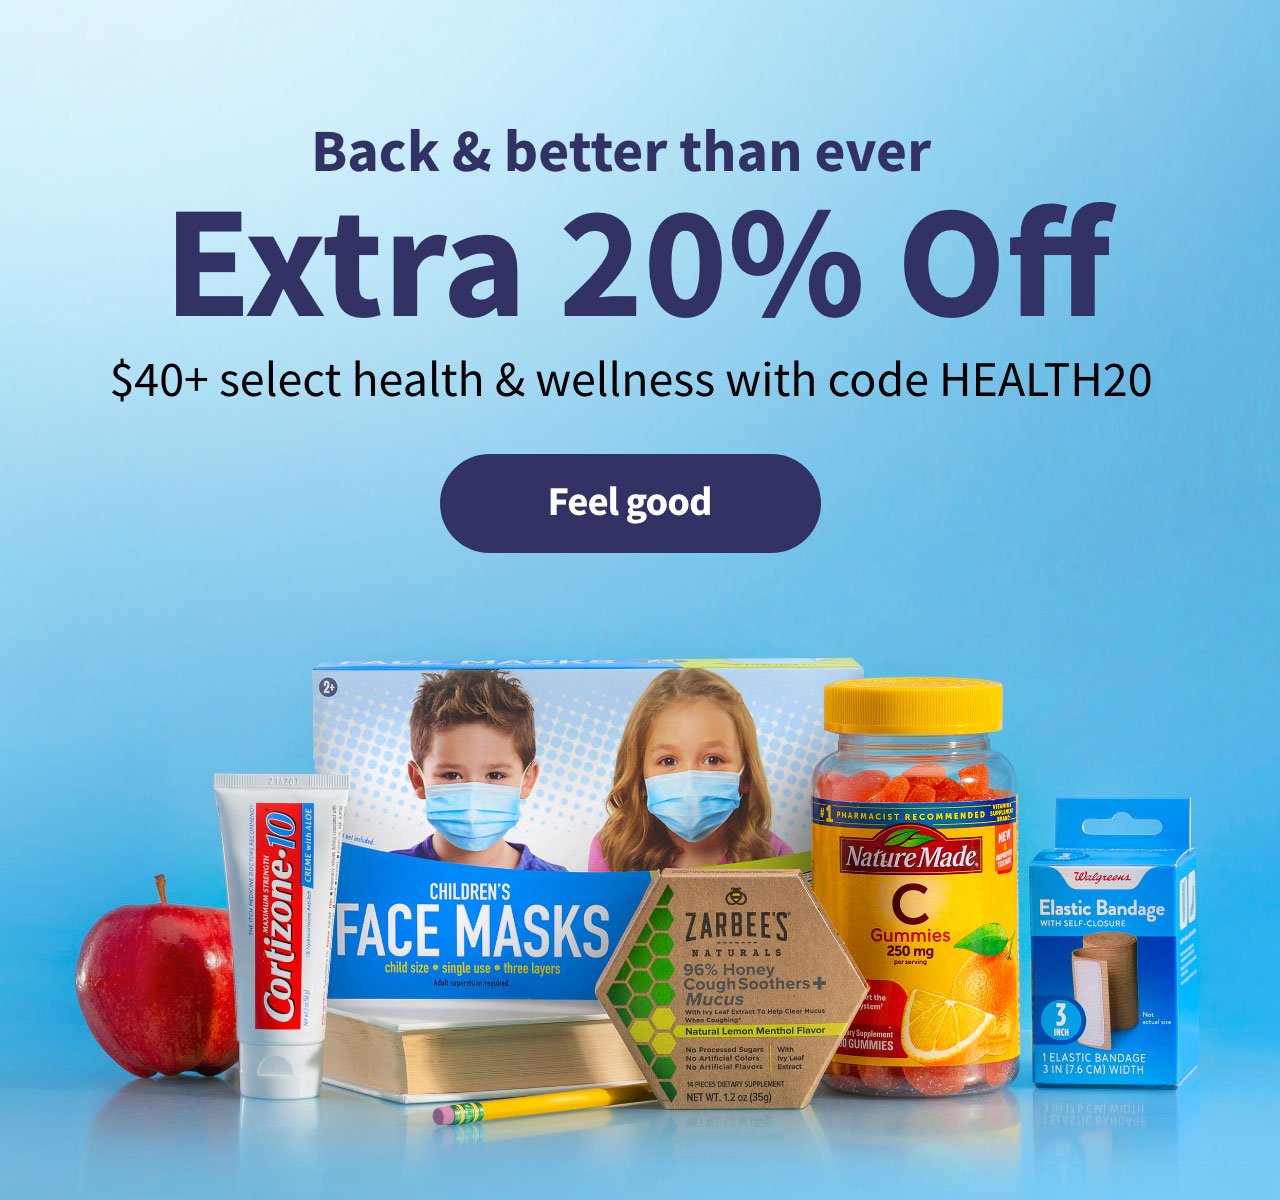 Back & better than ever. Extra 20% Off $40+ select health & wellness with code HEALTH20. Feel good.